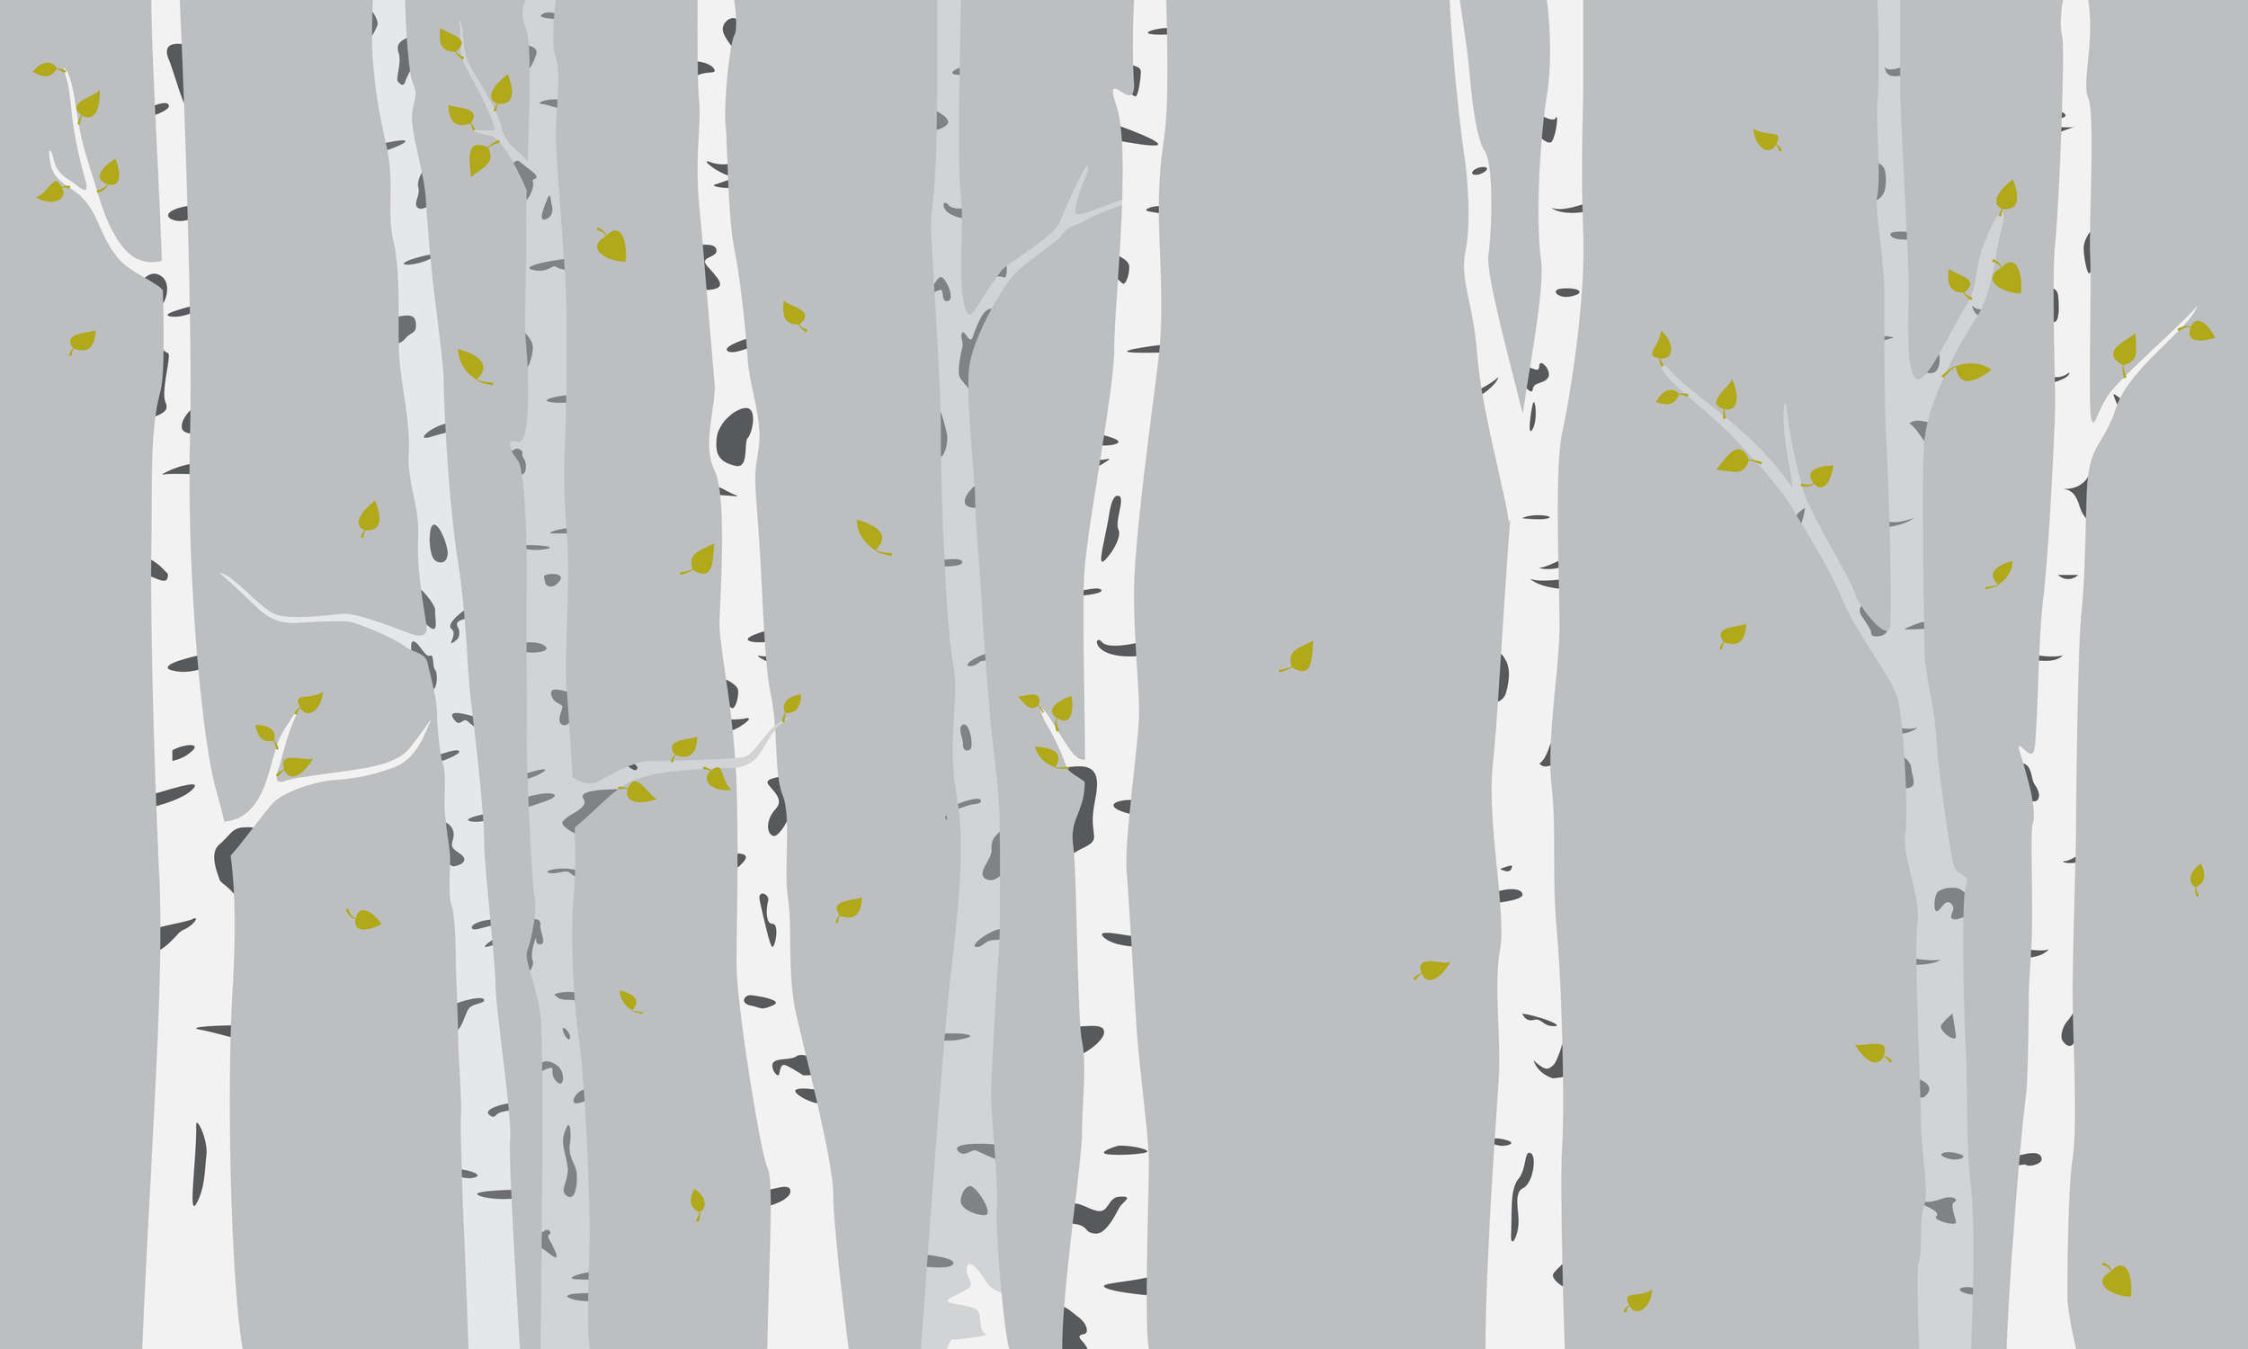             Photo wallpaper with painted birch forest for children's room - Smooth & slightly shiny non-woven
        